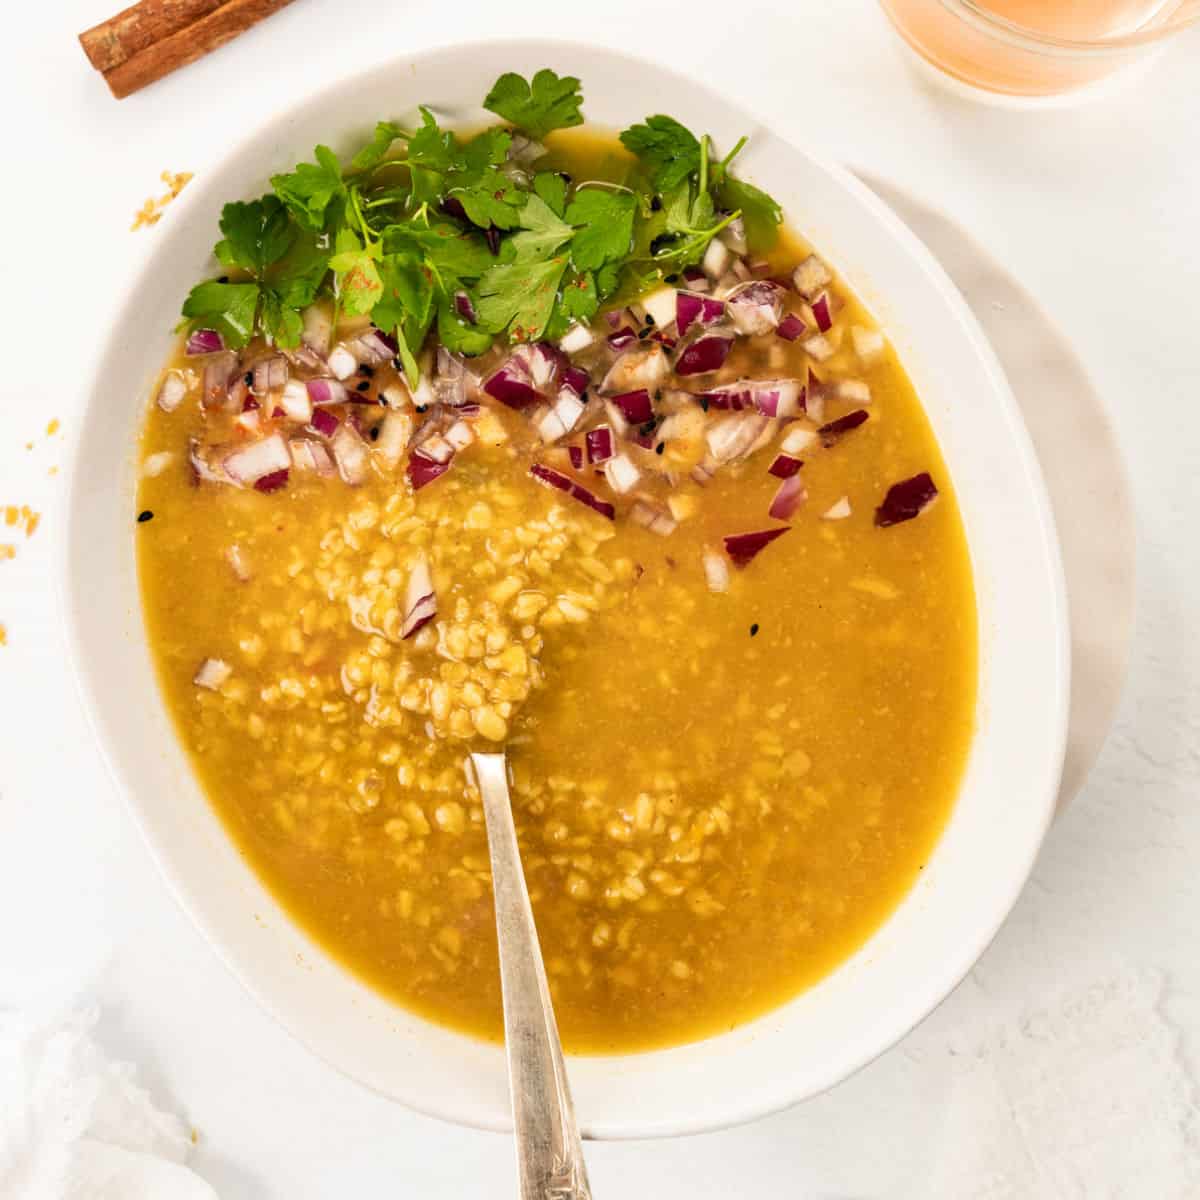 a bowl filled with thick yellow soup, topped with diced red onions and green herbs